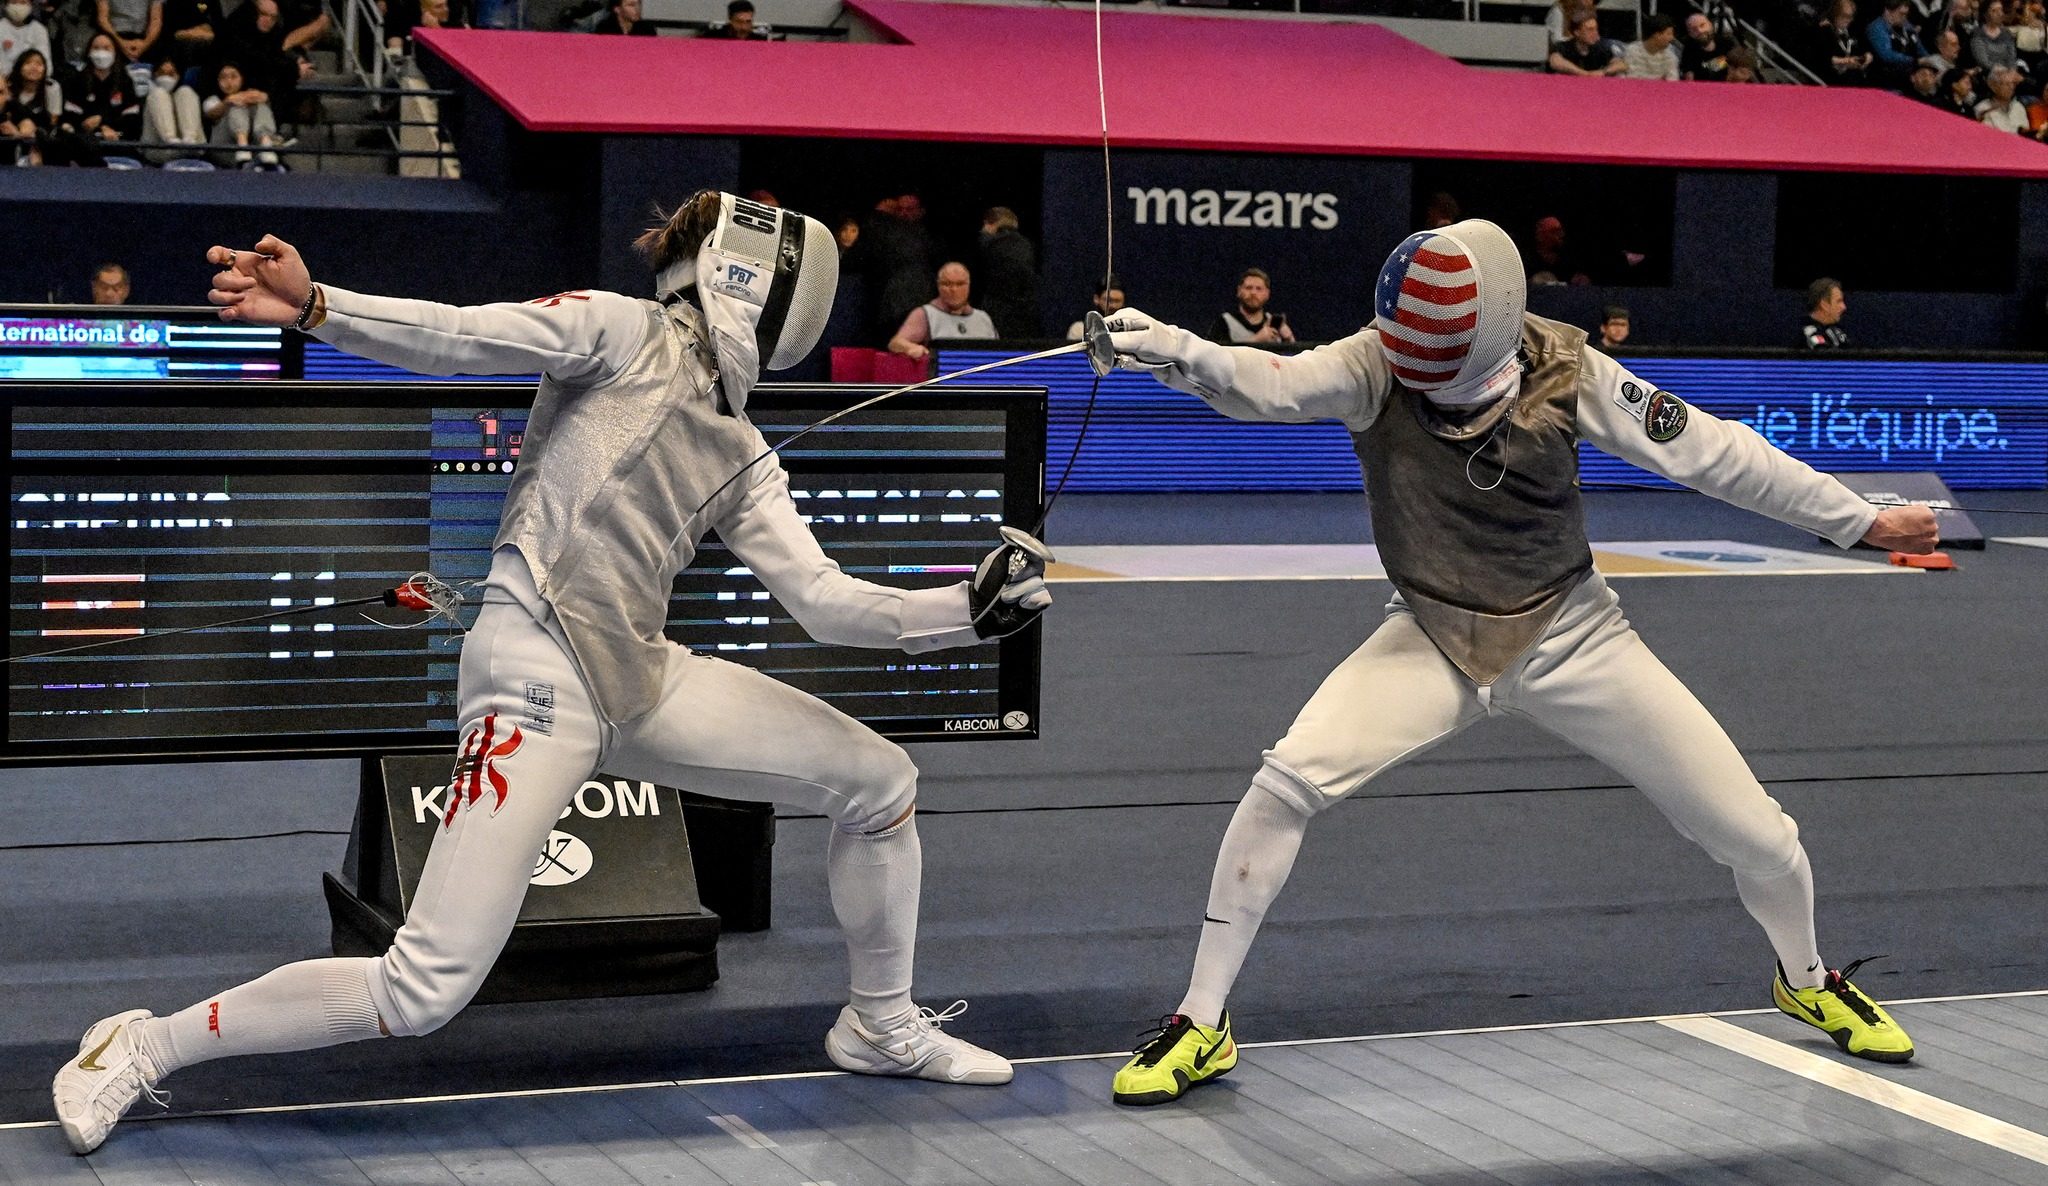 Cheung (right) against Massialas in the semifinals. Photo: FIE 